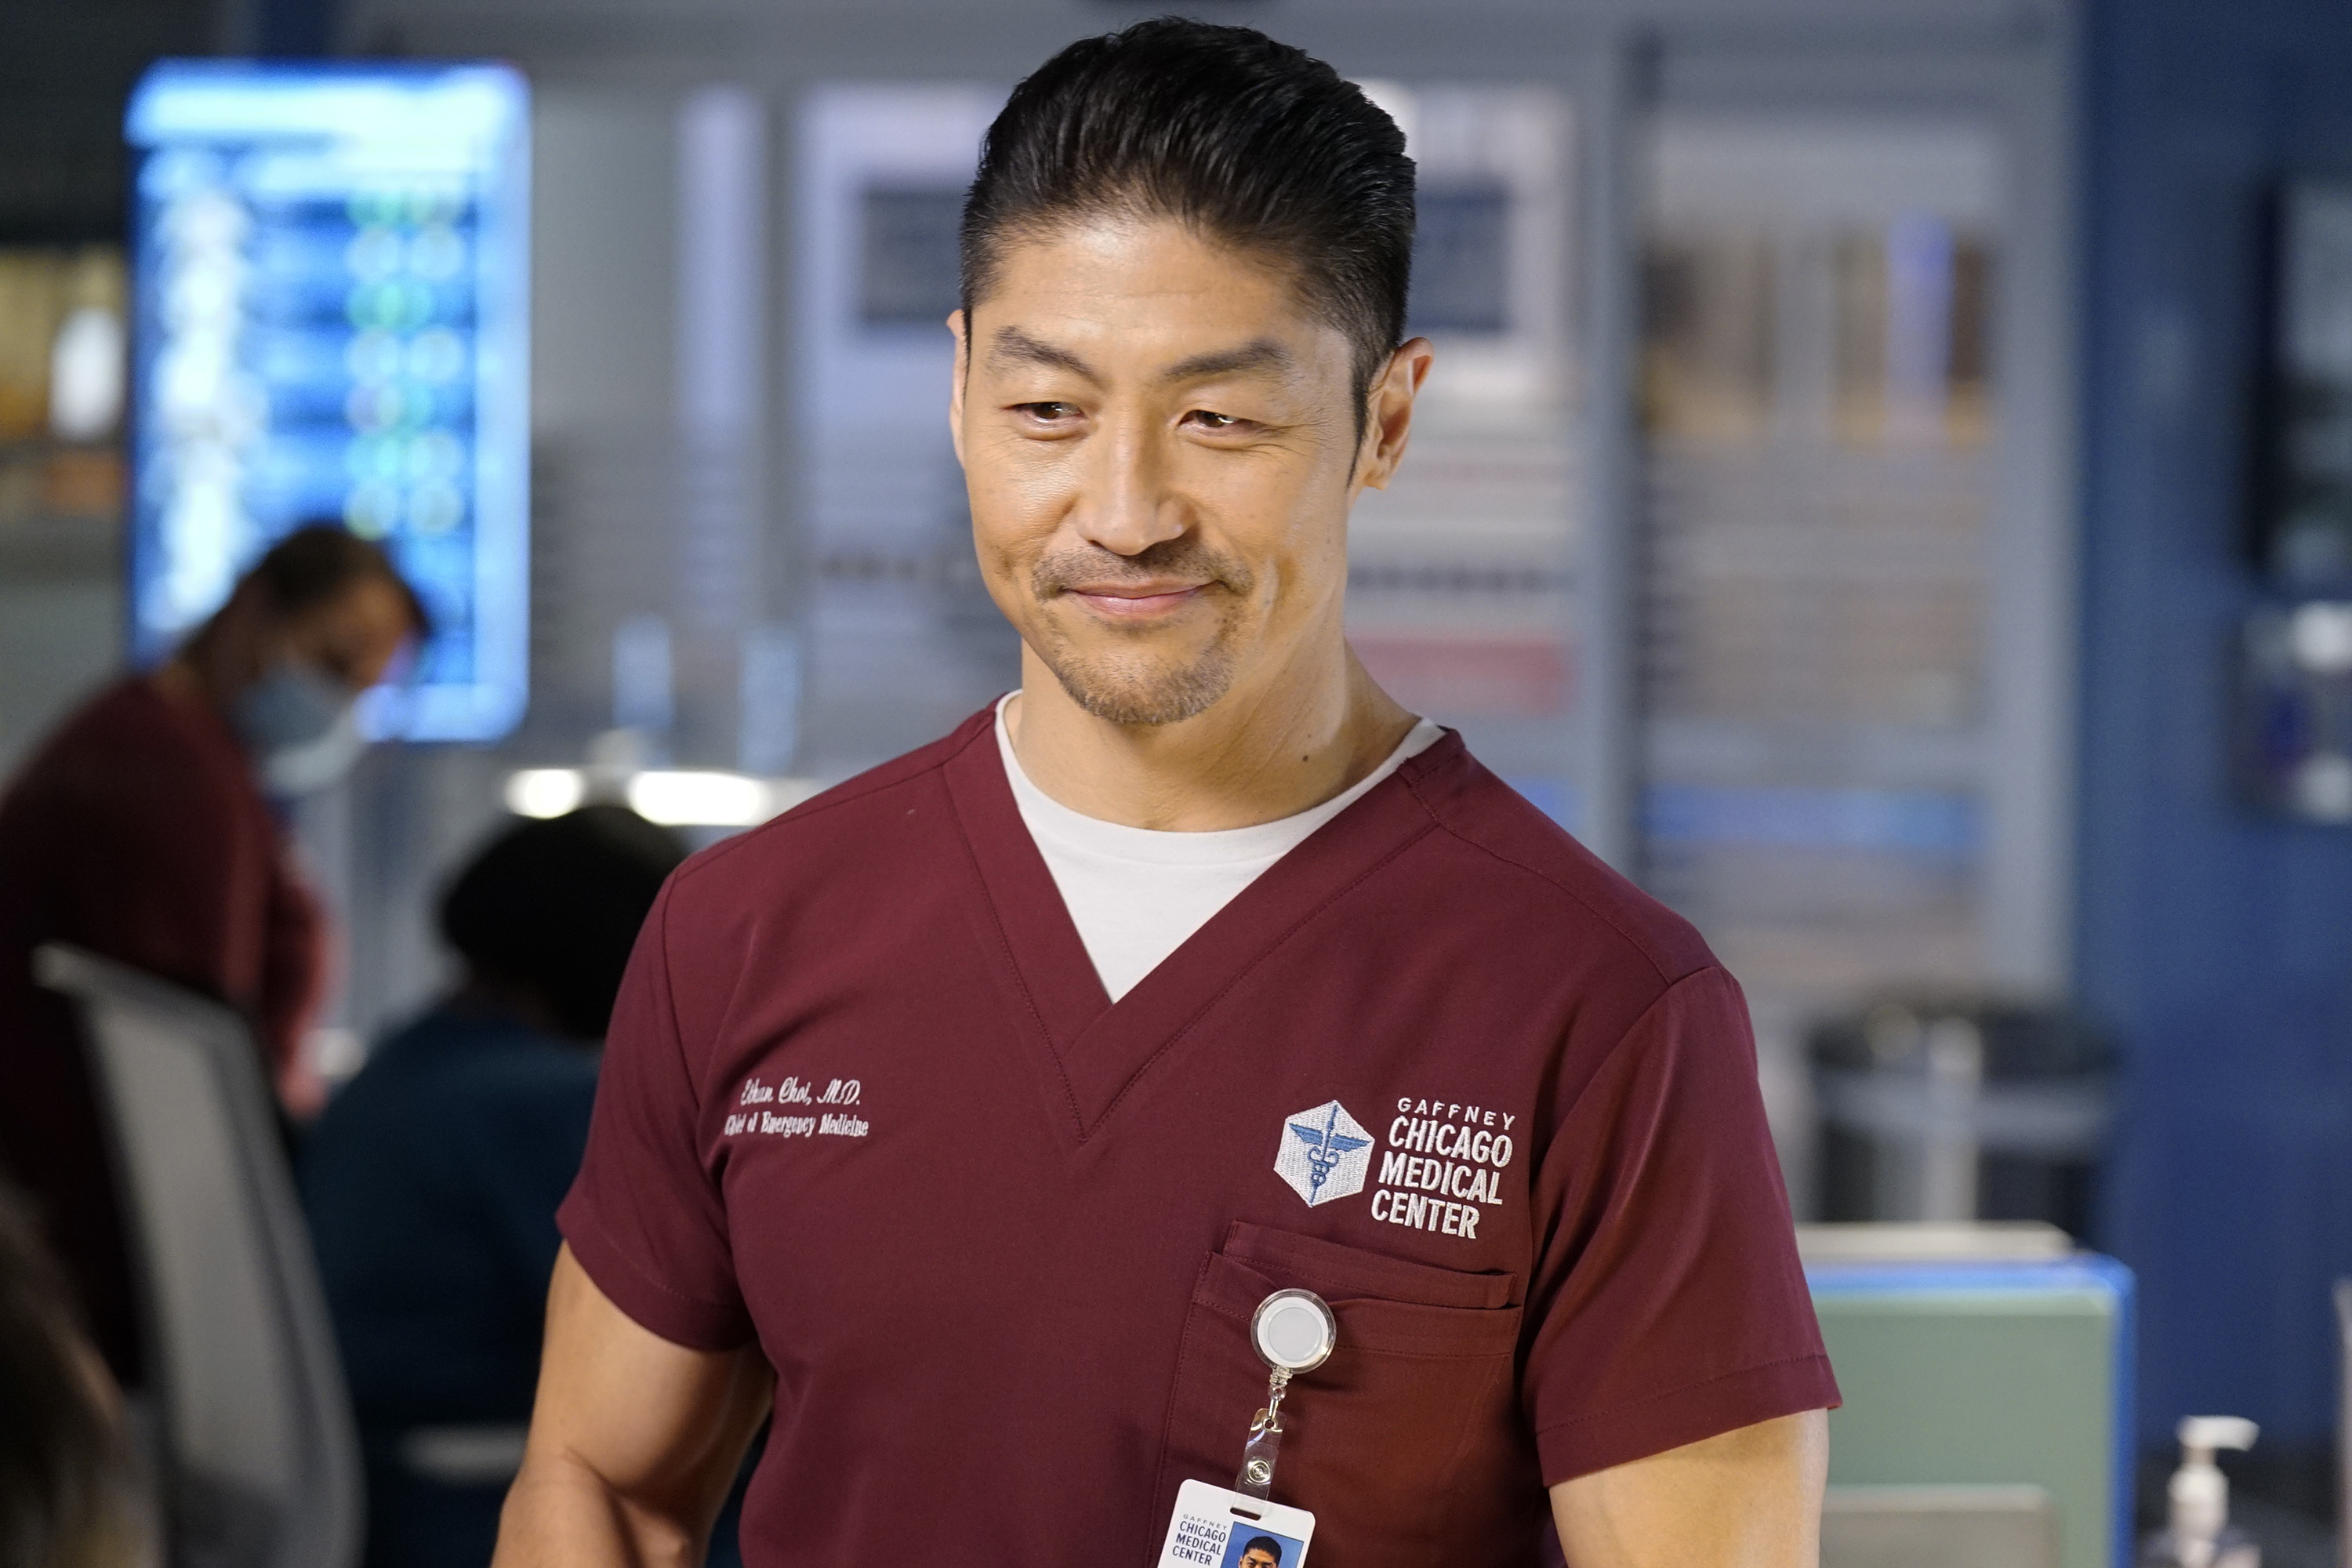 Brian Tee as Ethan Choi in "Chicago Med" in 2021. | Source: Getty Images